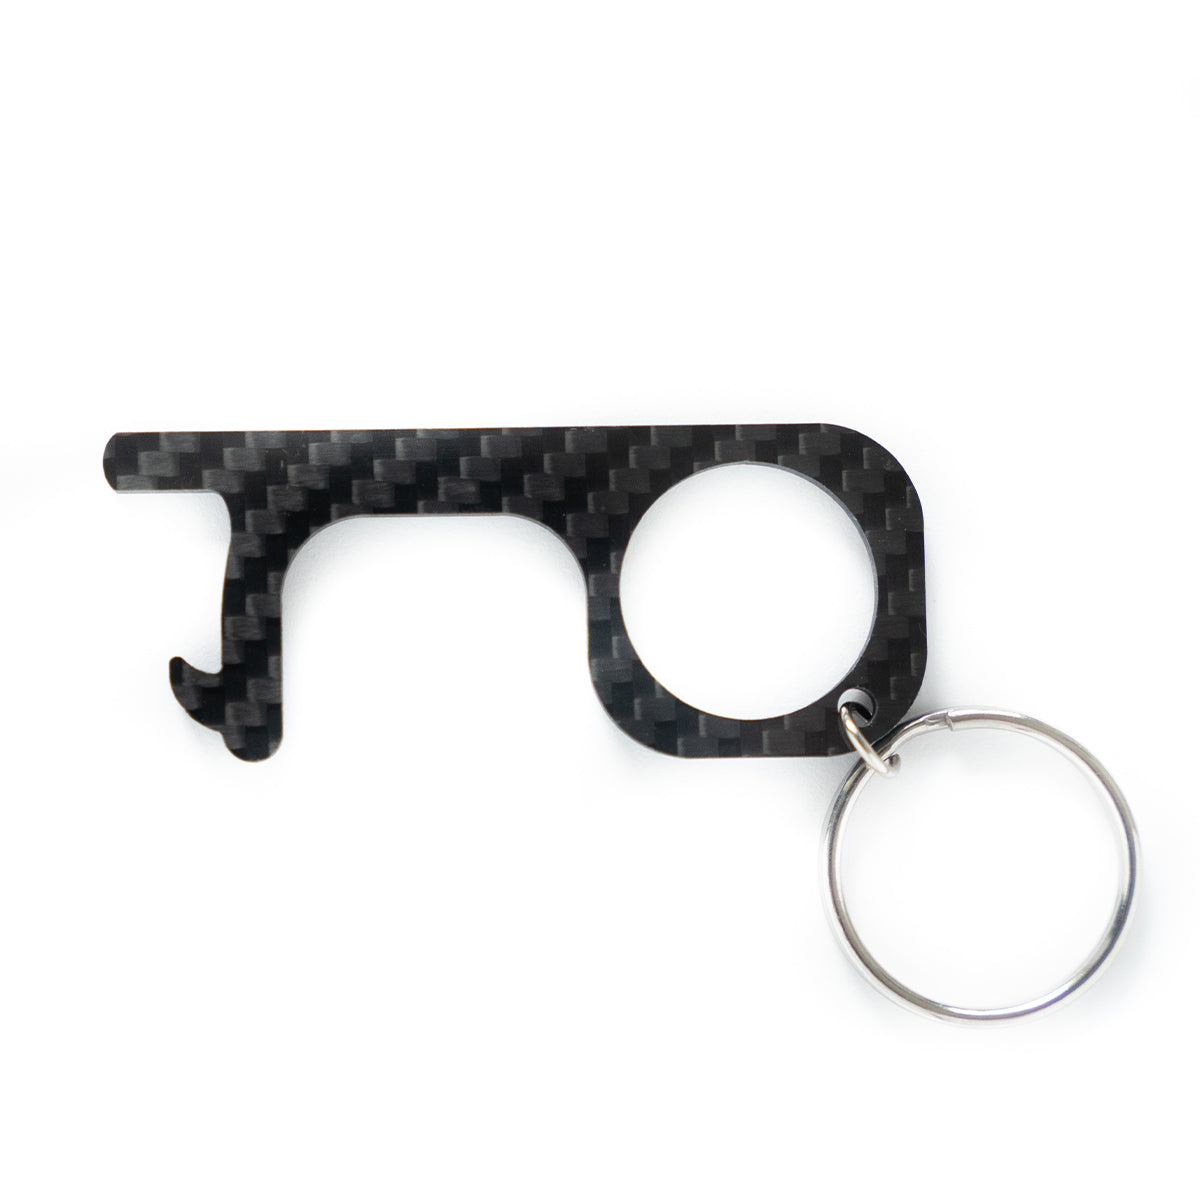 Real carbon fiber no-touch keychain and bottle opener